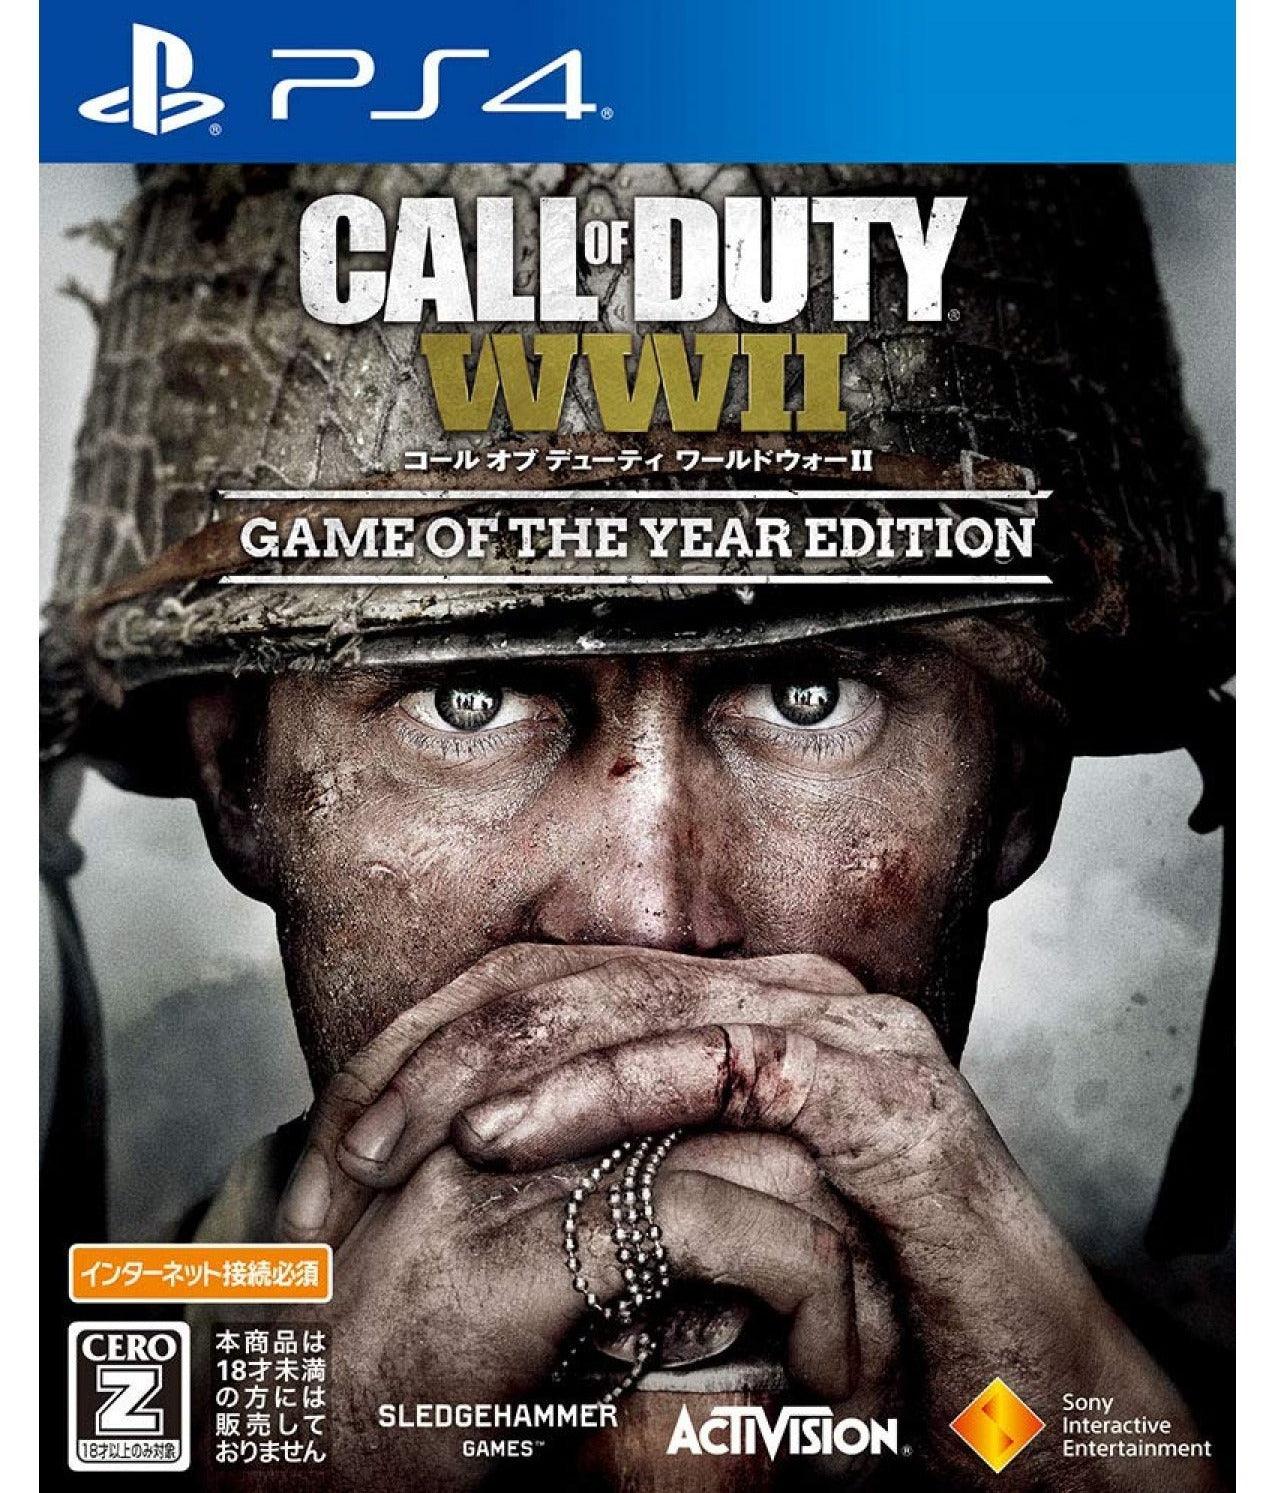 PS4 OF DUTY: GAME OF THE YEAR REG.3